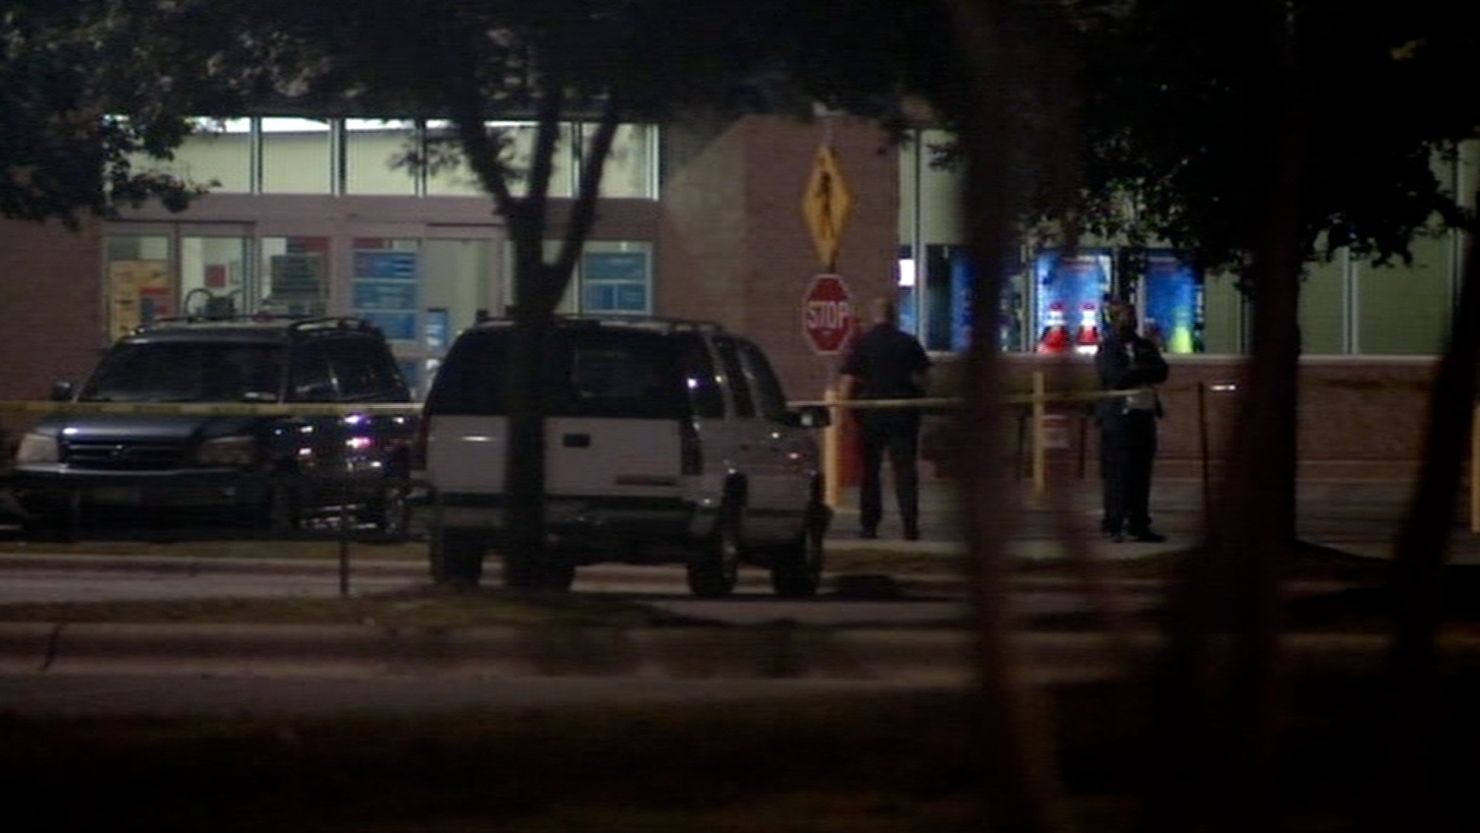 Police investigate the scene of a shooting on Sunday at a parking lot in Cedar Park, Texas.